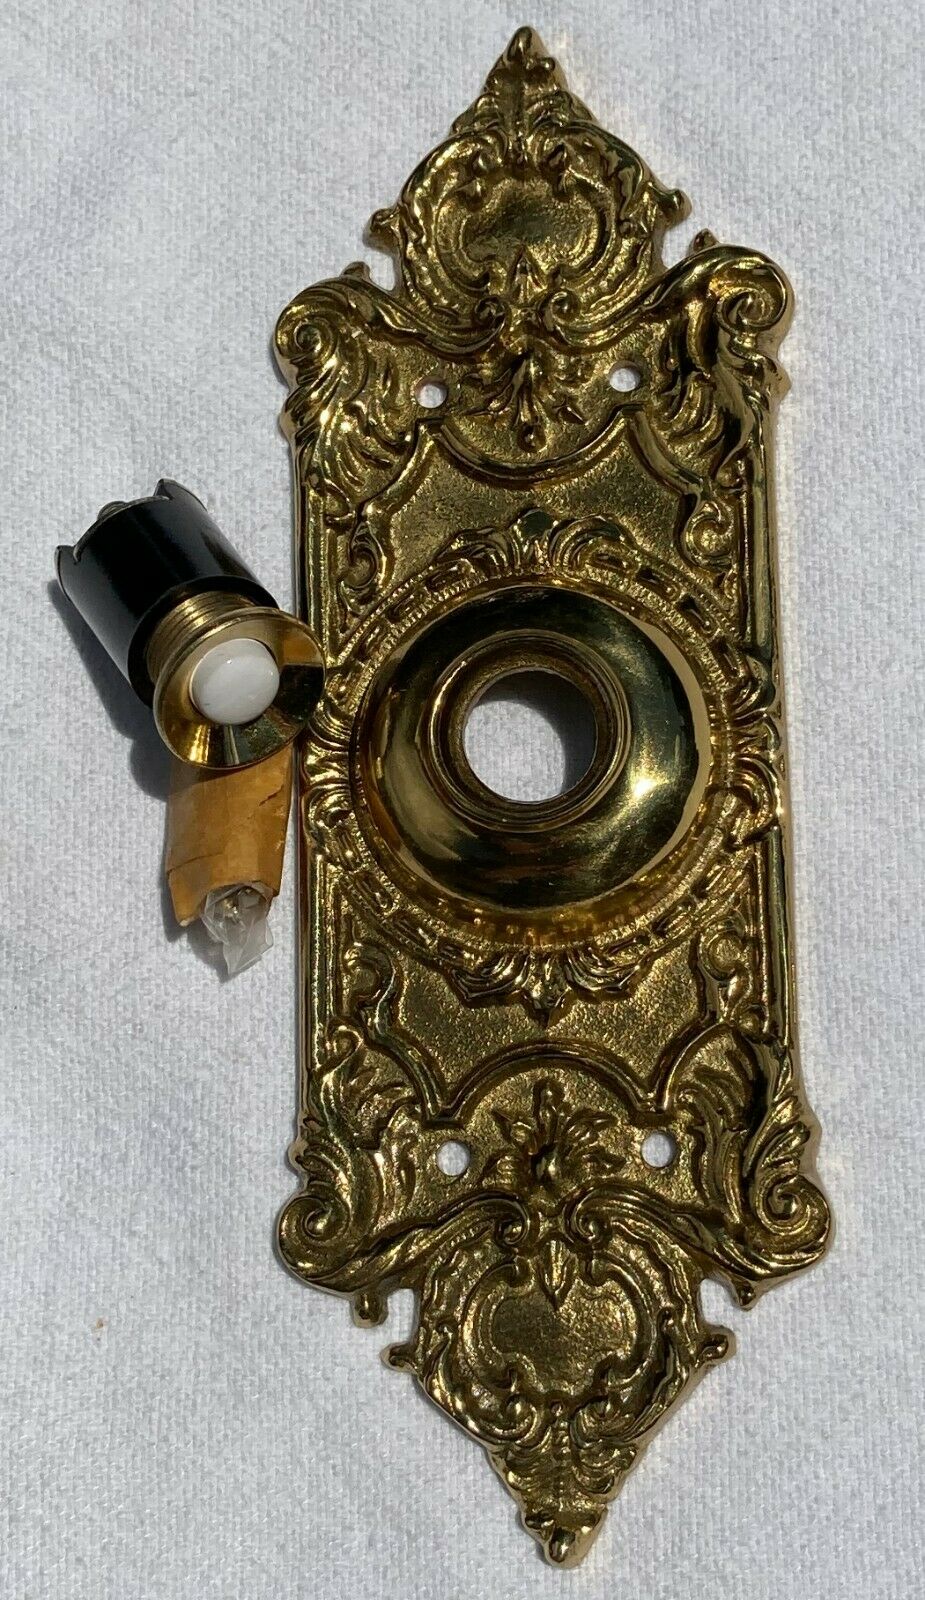 Vintage Victorian Door Bell With Housing Cover 7.5” Surround Plate ~ Cast Brass